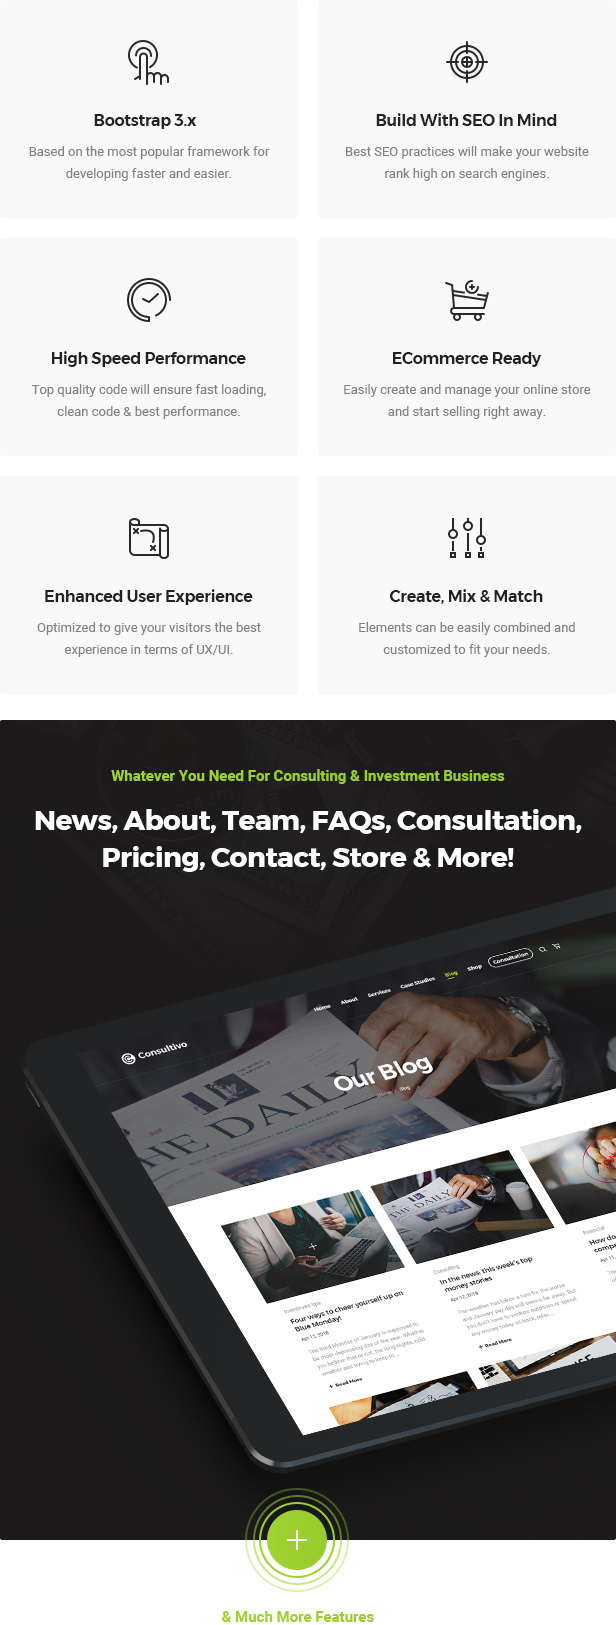 Consultivo - Business Consulting and Investments HTML5 Template - 4